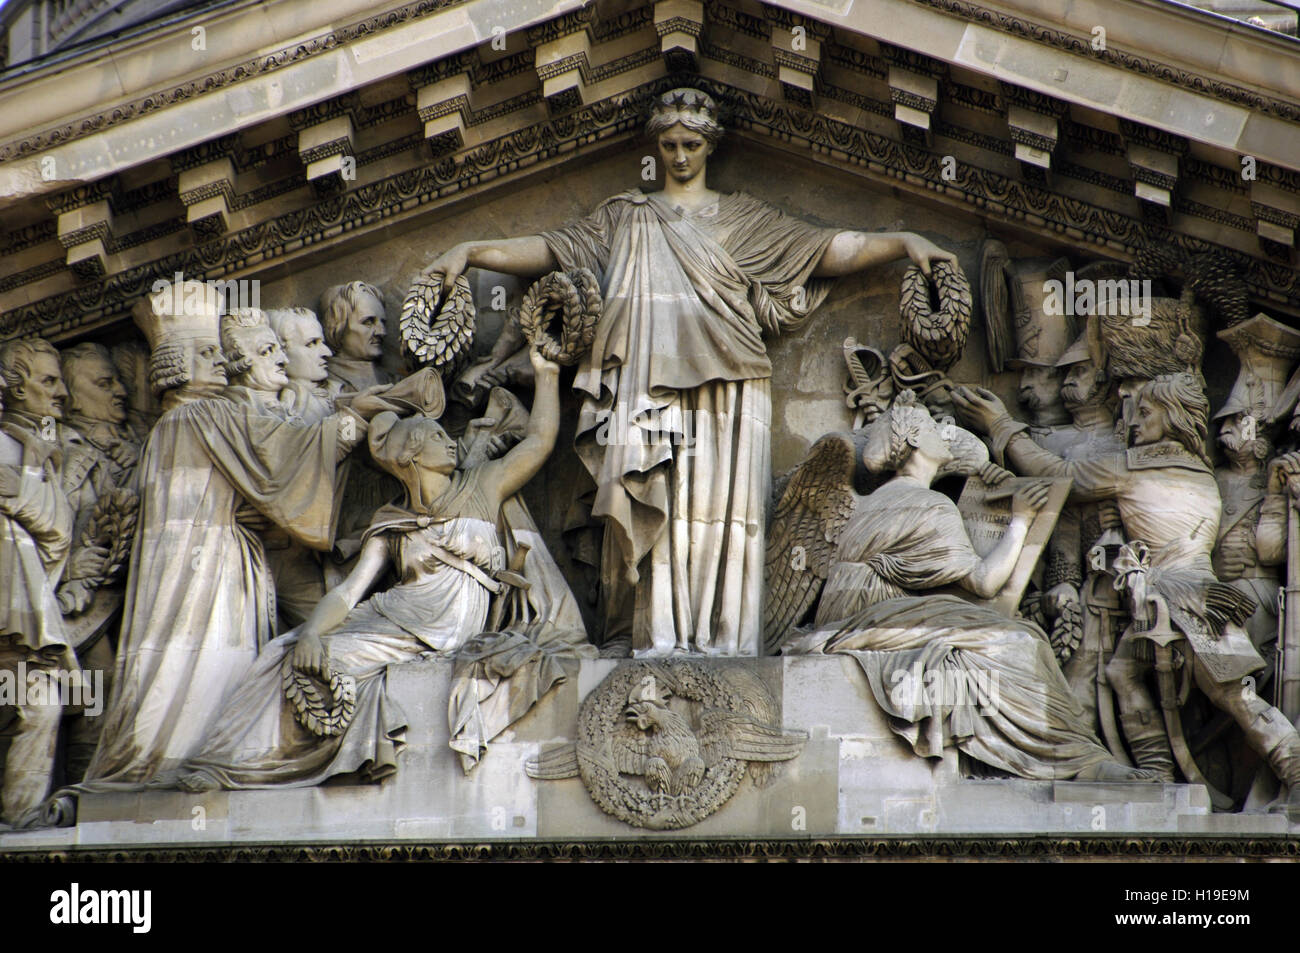 France. Paris. Pantheon's pediment. Detail. Sculpted by Pierre-Jean David d’Angers (1788-1856). In the center, the Republic handing crowns to Liberty (left) while History (right corner) writes down the names of those deemed worthy of the crowns. In the first row, the recipients are Malesherbes, Mirabeau, Monge and Fenelon. In the second row are Lazare Carnot, Berthollet and Laplace. To the right of the central group, Napoleon Bonaparte leads an army of anonymous soldiers. Stock Photo